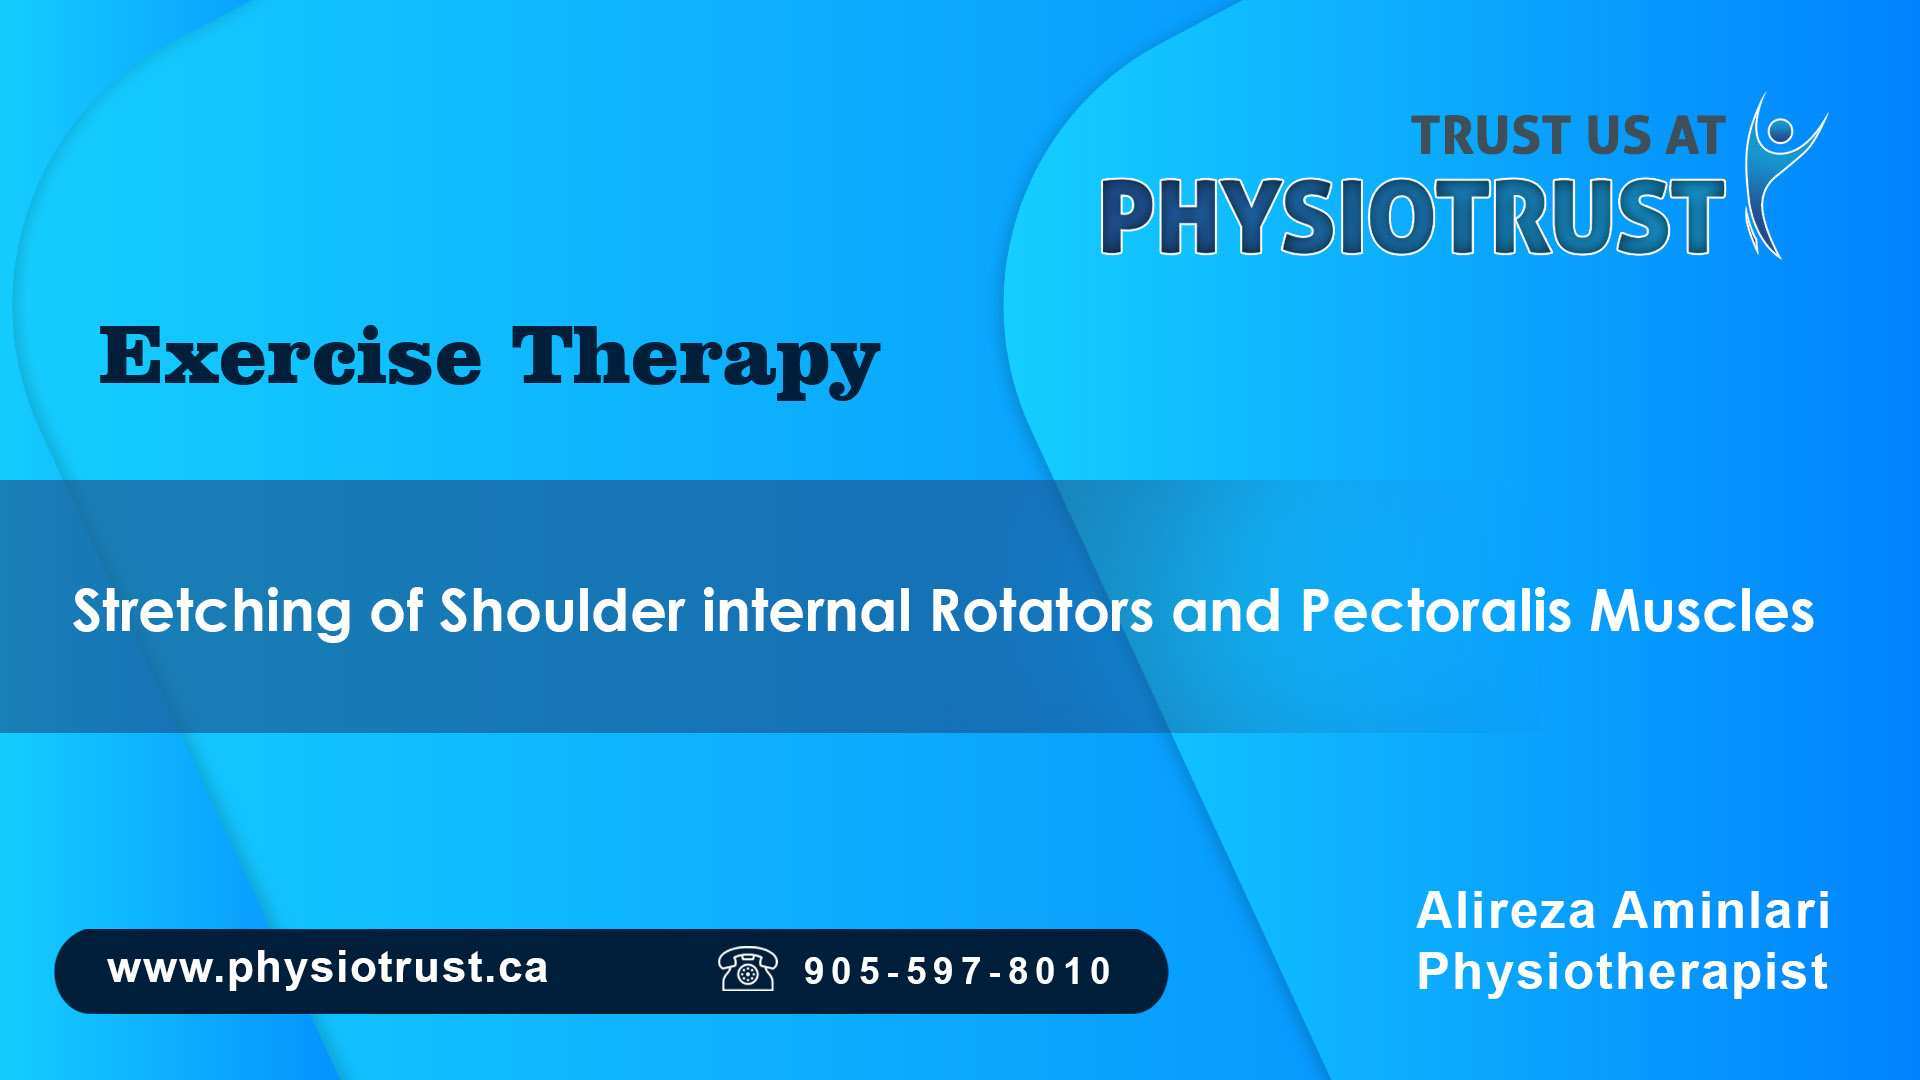  Stretching of shoulder internal rotators and pectorals muscles